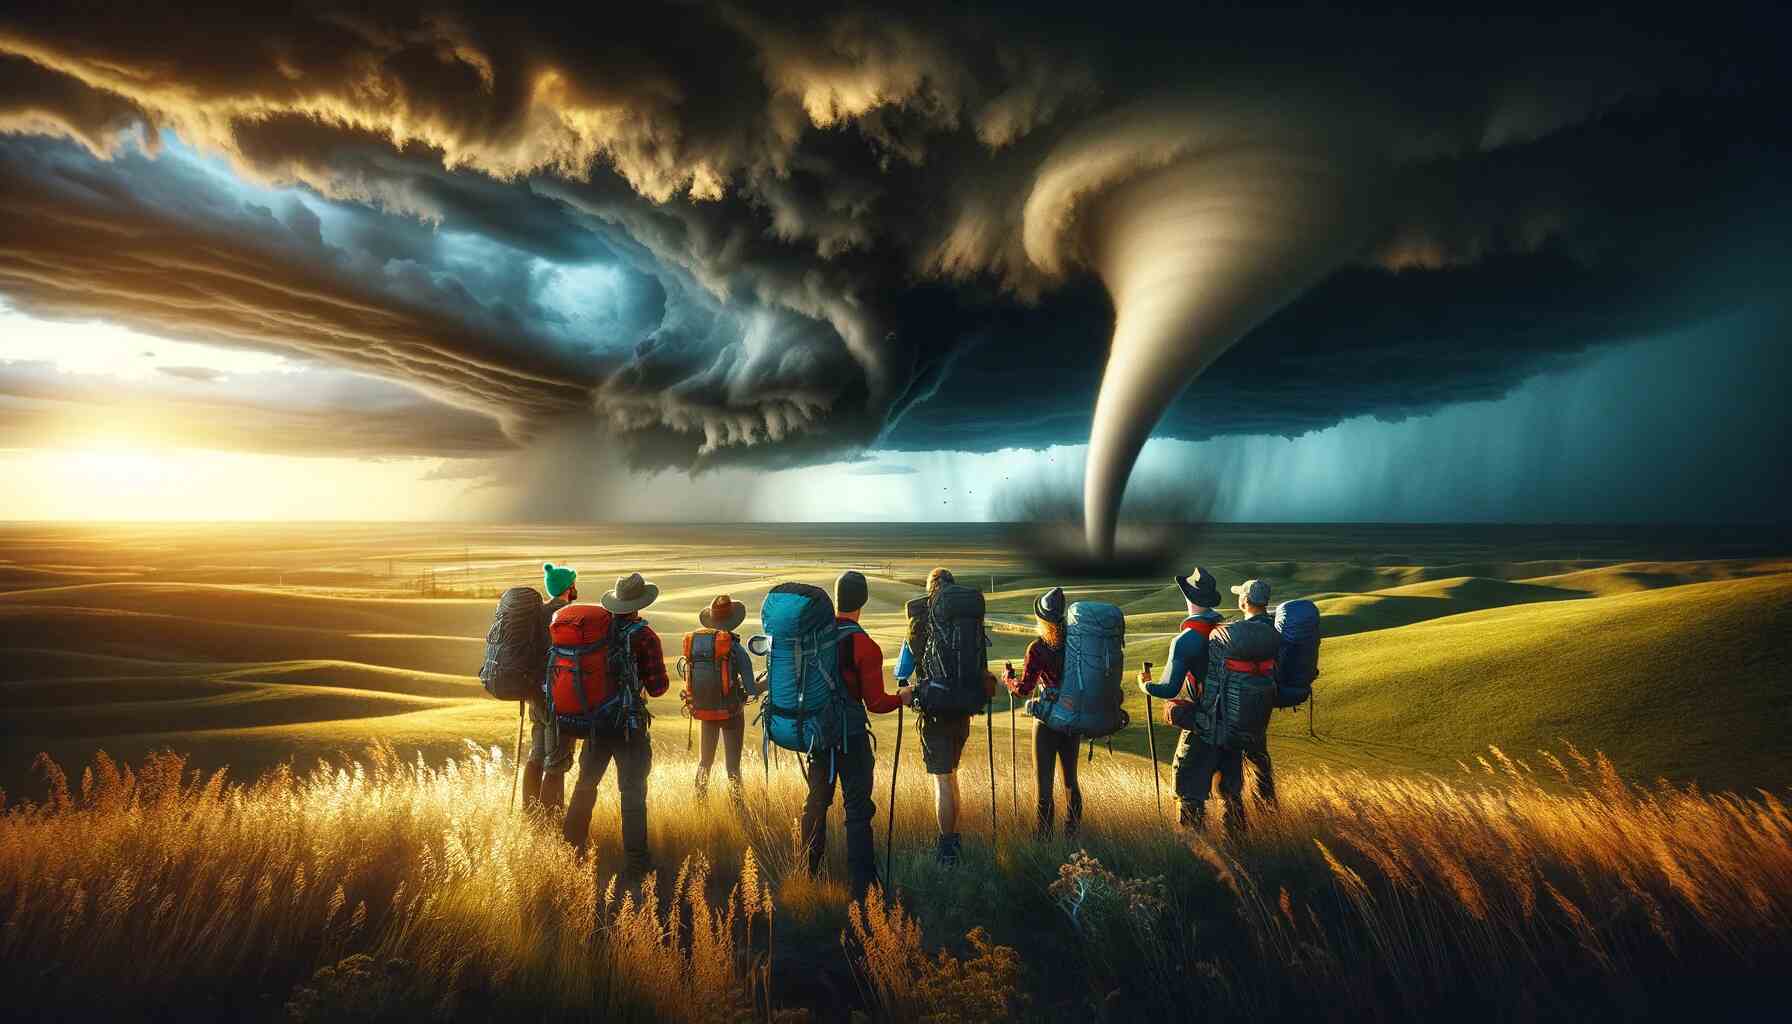 Here is the featured image for "Tornado Safety and Outdoor Adventures: A Must-Read Guide." It visually represents the theme of the guide, showing hikers observing a distant tornado in a dramatic landscape.